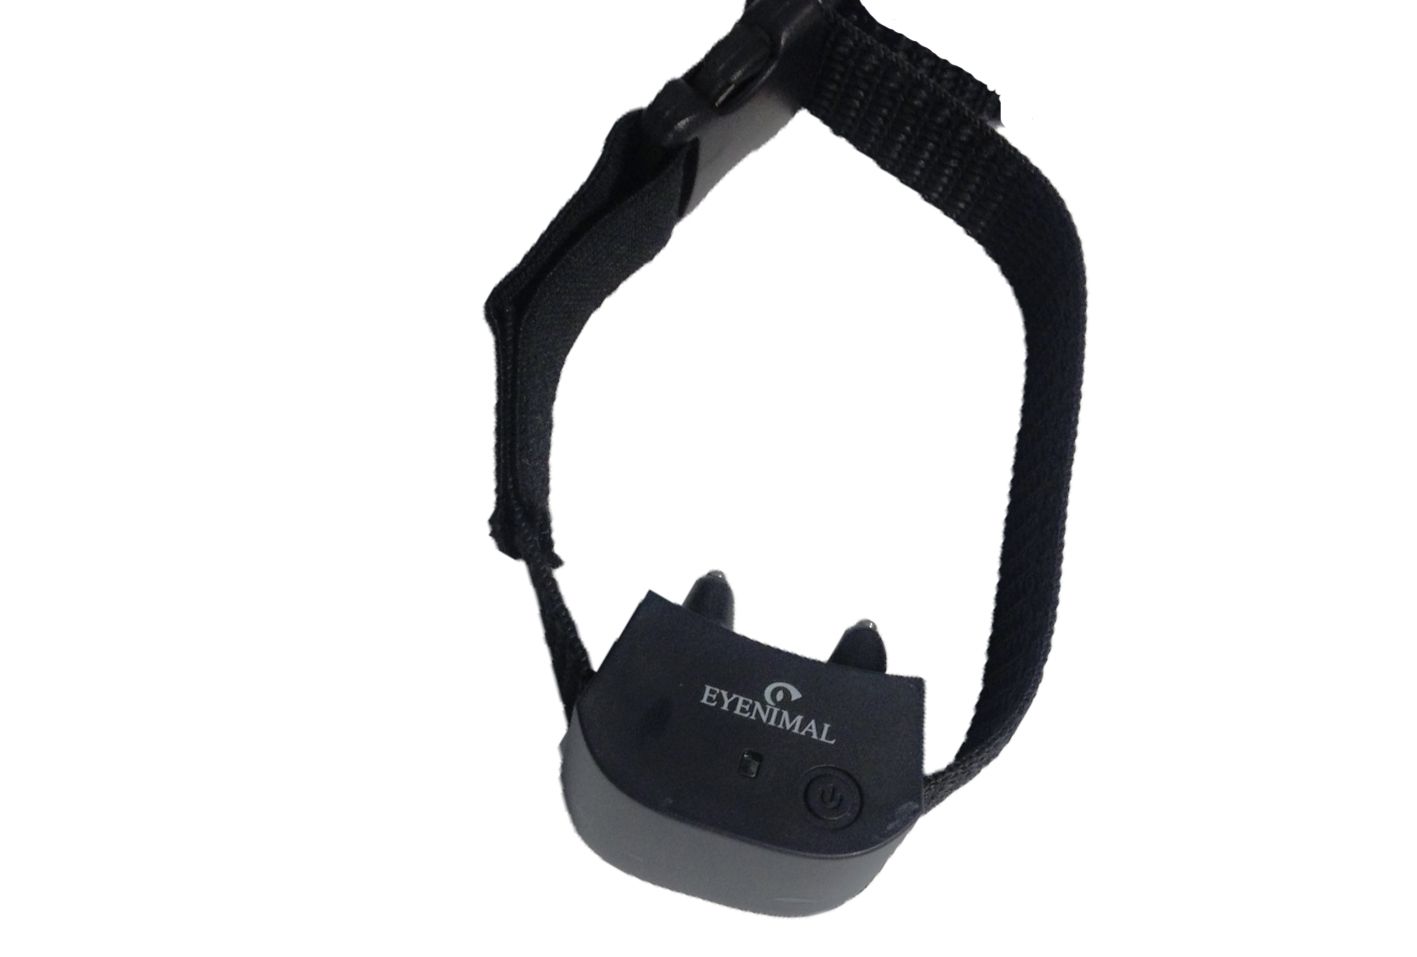 Miniature Collar for Eyenimal Containment Fence